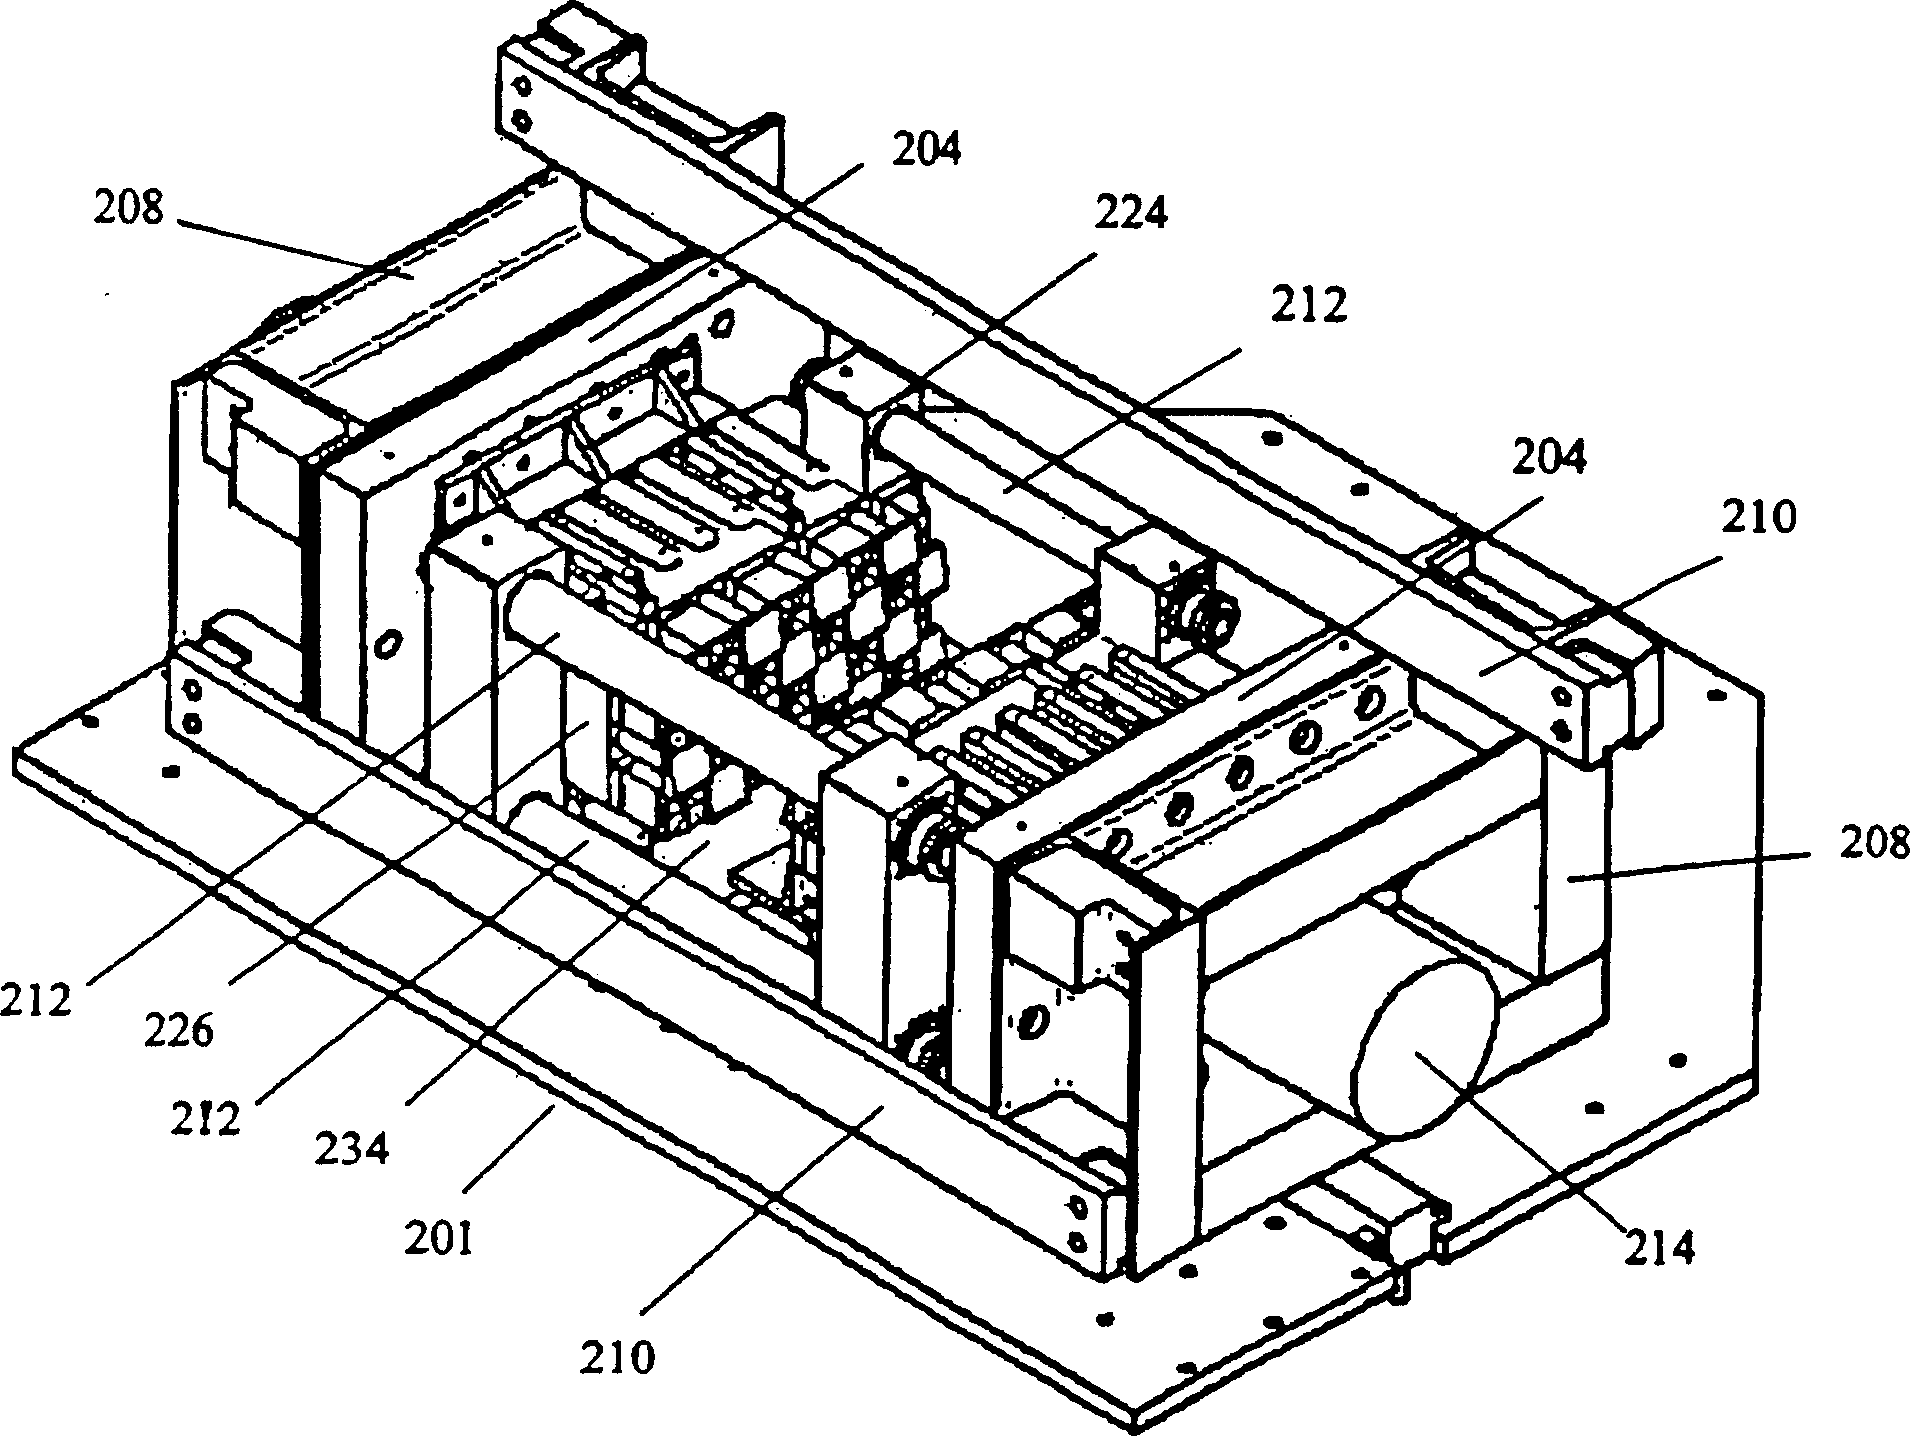 Checkerboard shear volume reduction system